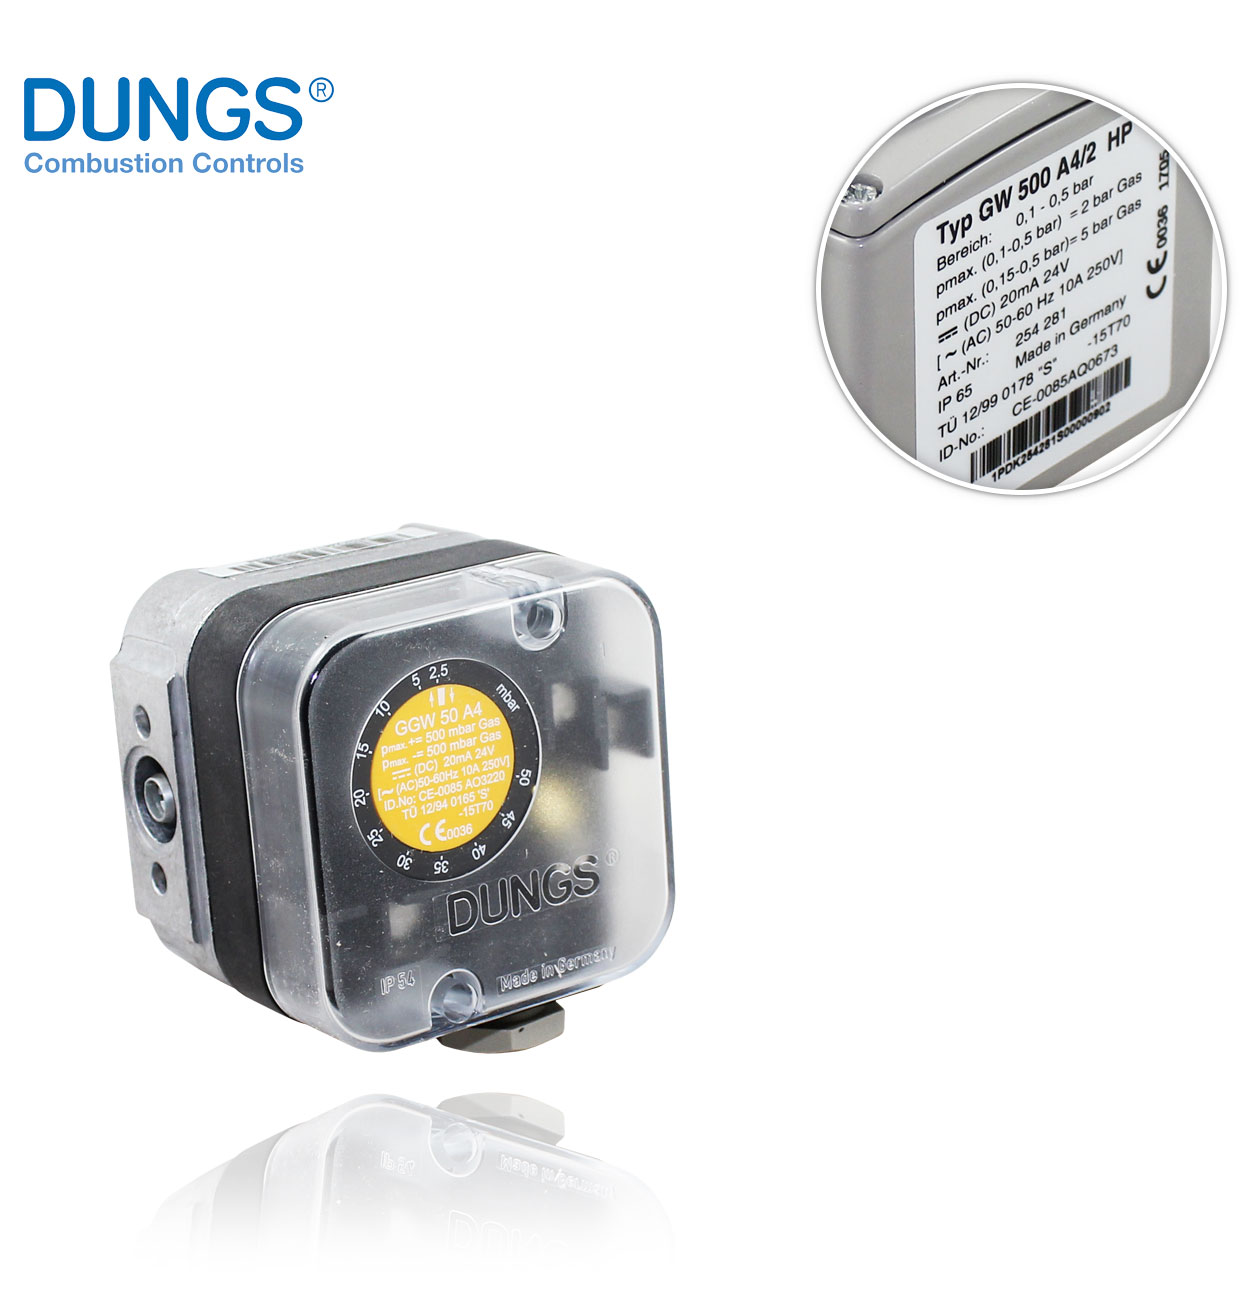 GGW 50 A4 2.5 A 50mbar FOR DUNGS 246176 GAS AND/OR AIR DIFFERENTIAL PRESSURE SWITCH